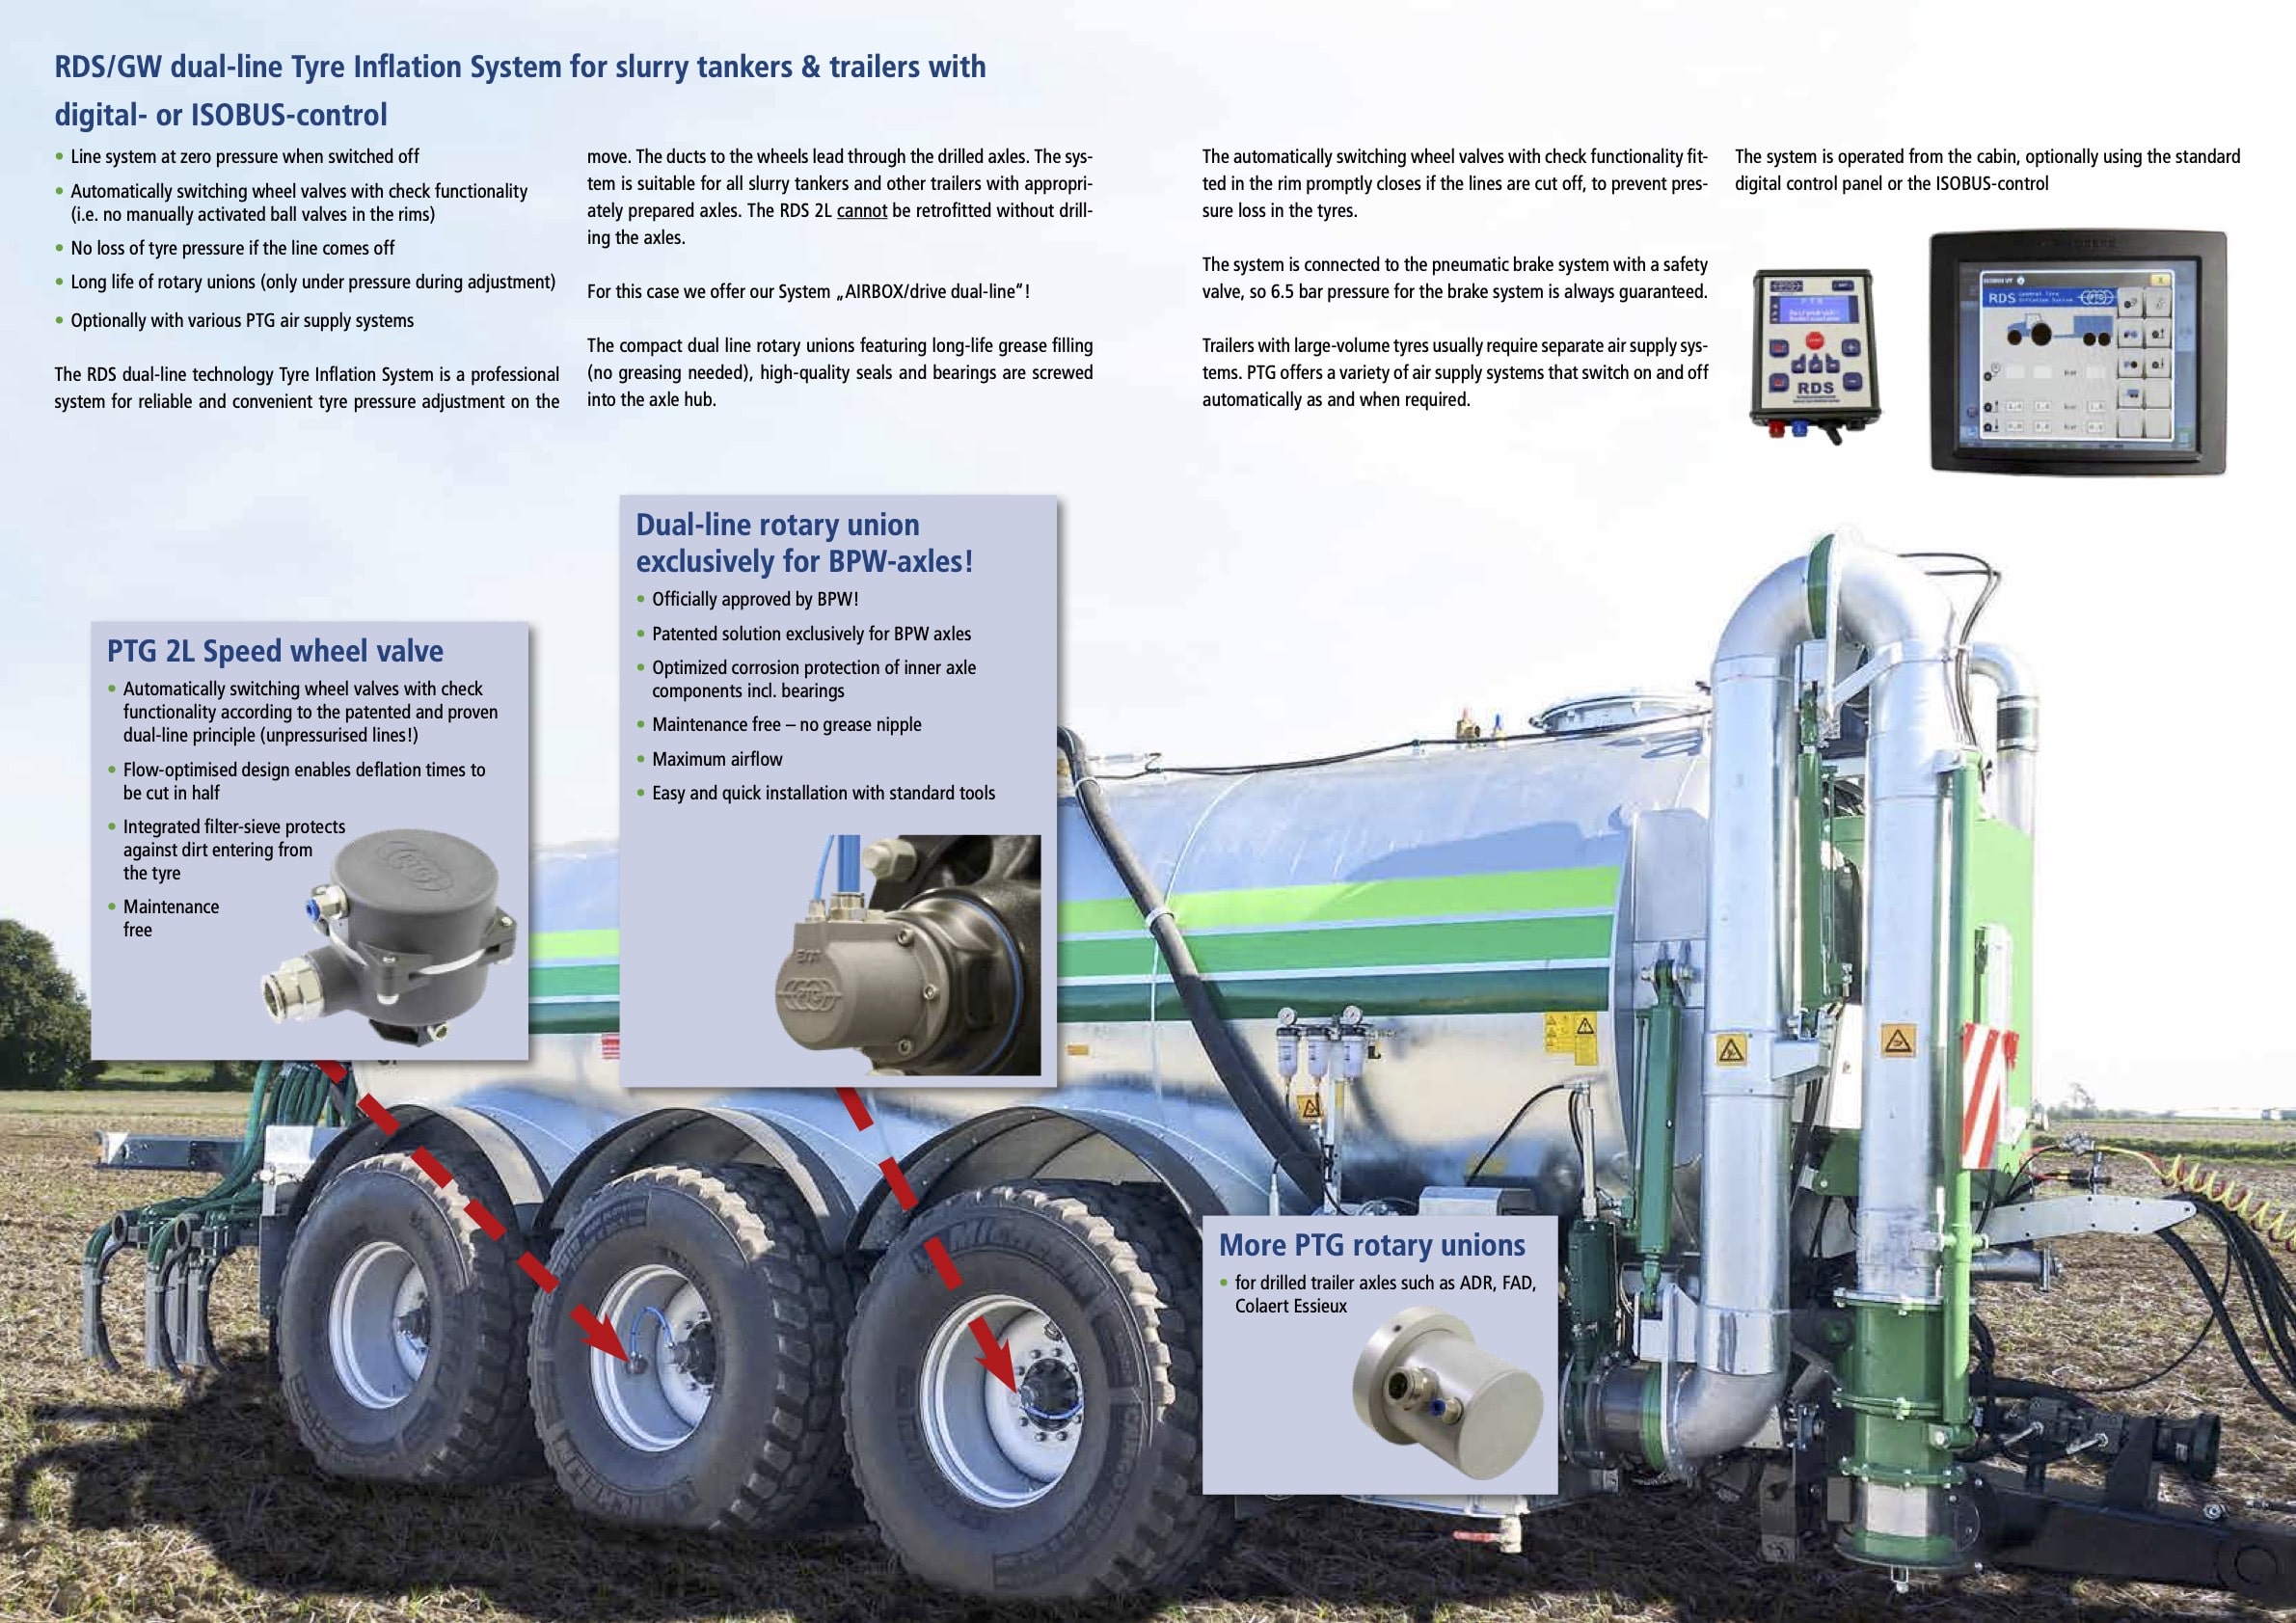 RDS/GW 2L for Slurry Tankers and Trailers